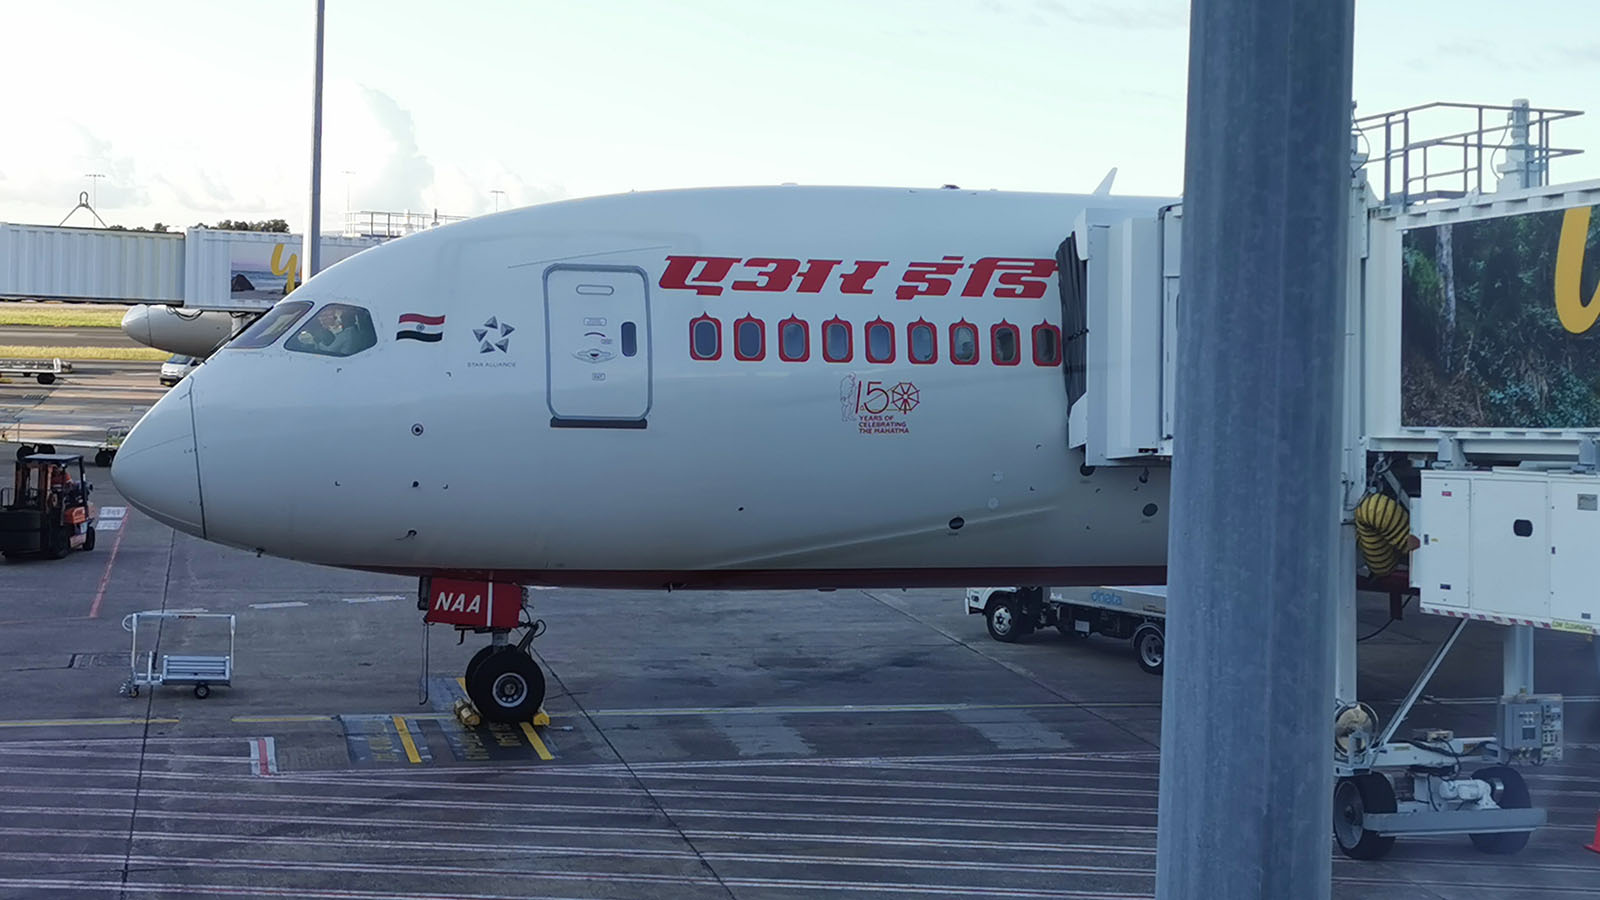 Air India plane parked at Sydney Airport